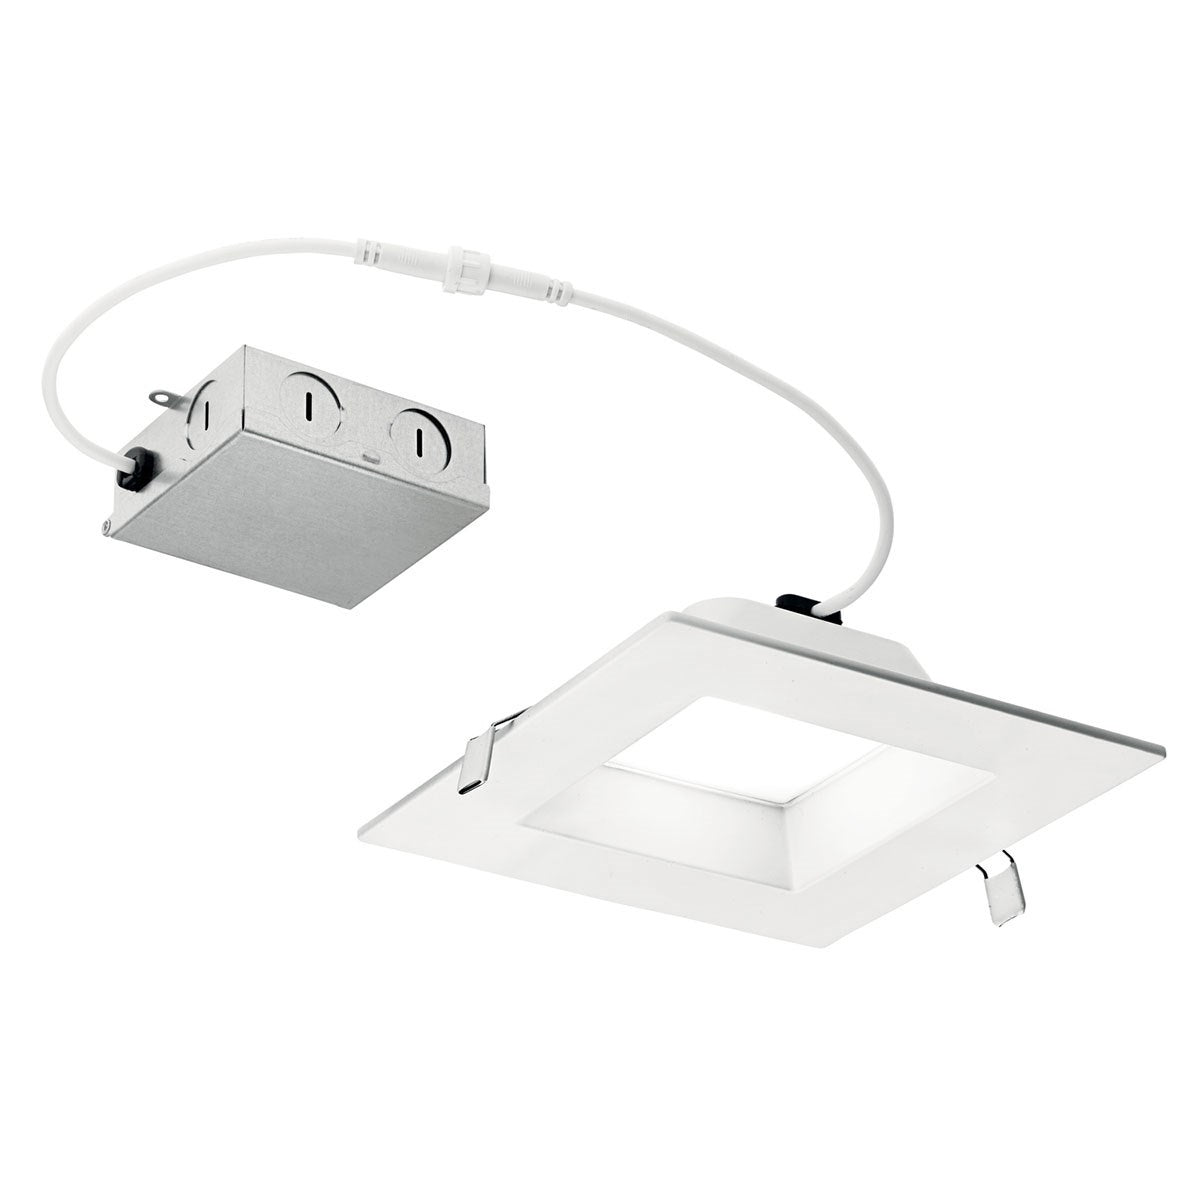 Kichler Canada - LED Recessed Downlight - Direct To Ceiling Recessed - Textured White- Union Lighting Luminaires Decor